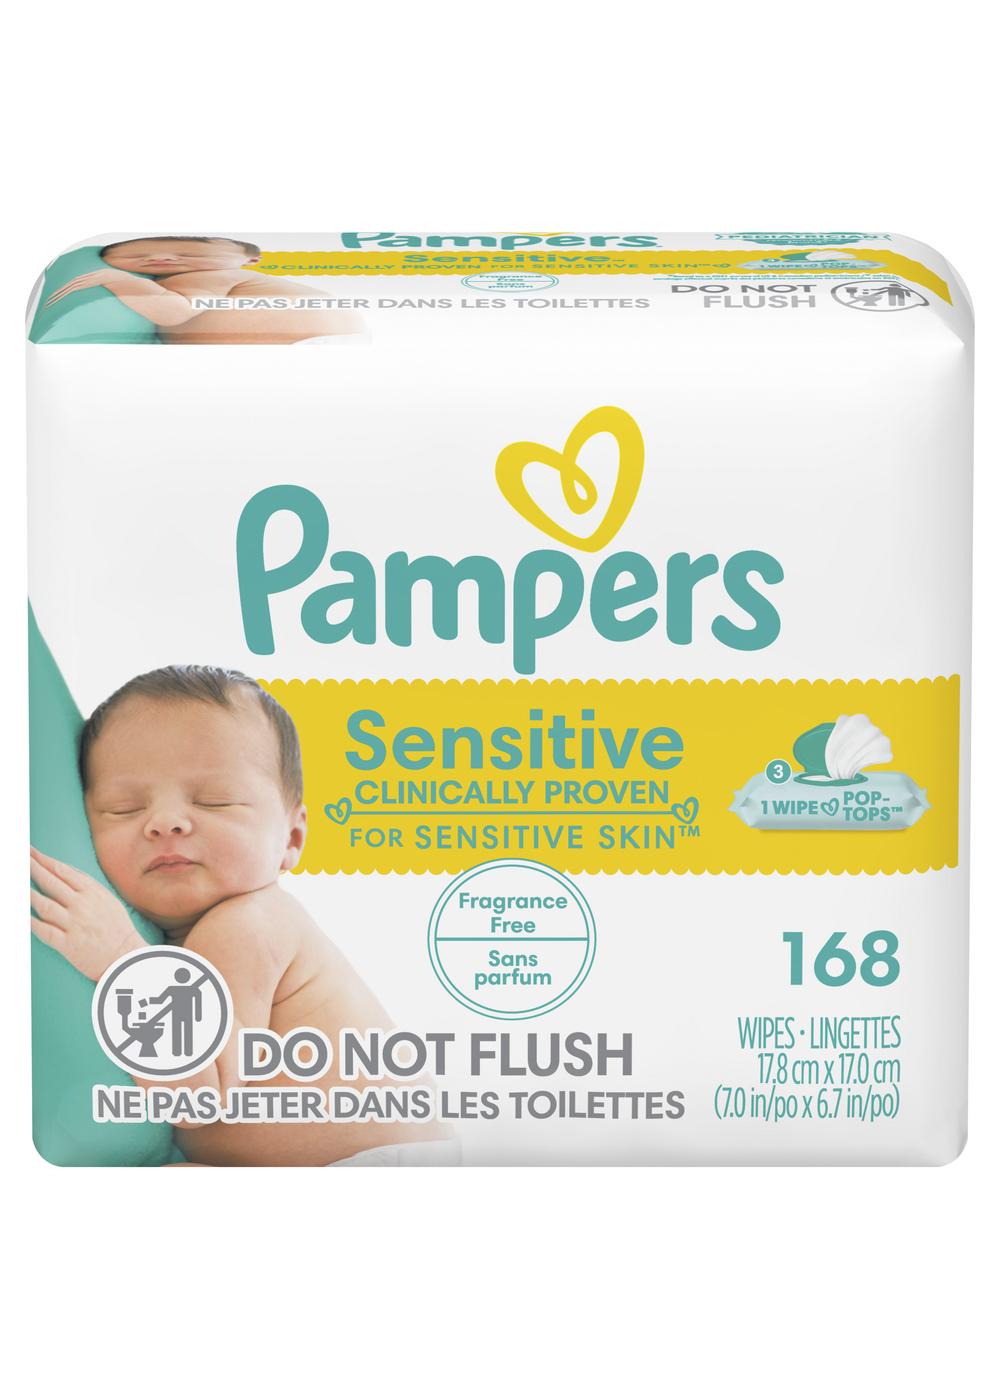 Pampers Baby Wipes - Fragrance Free - Shop Baby Wipes at H-E-B